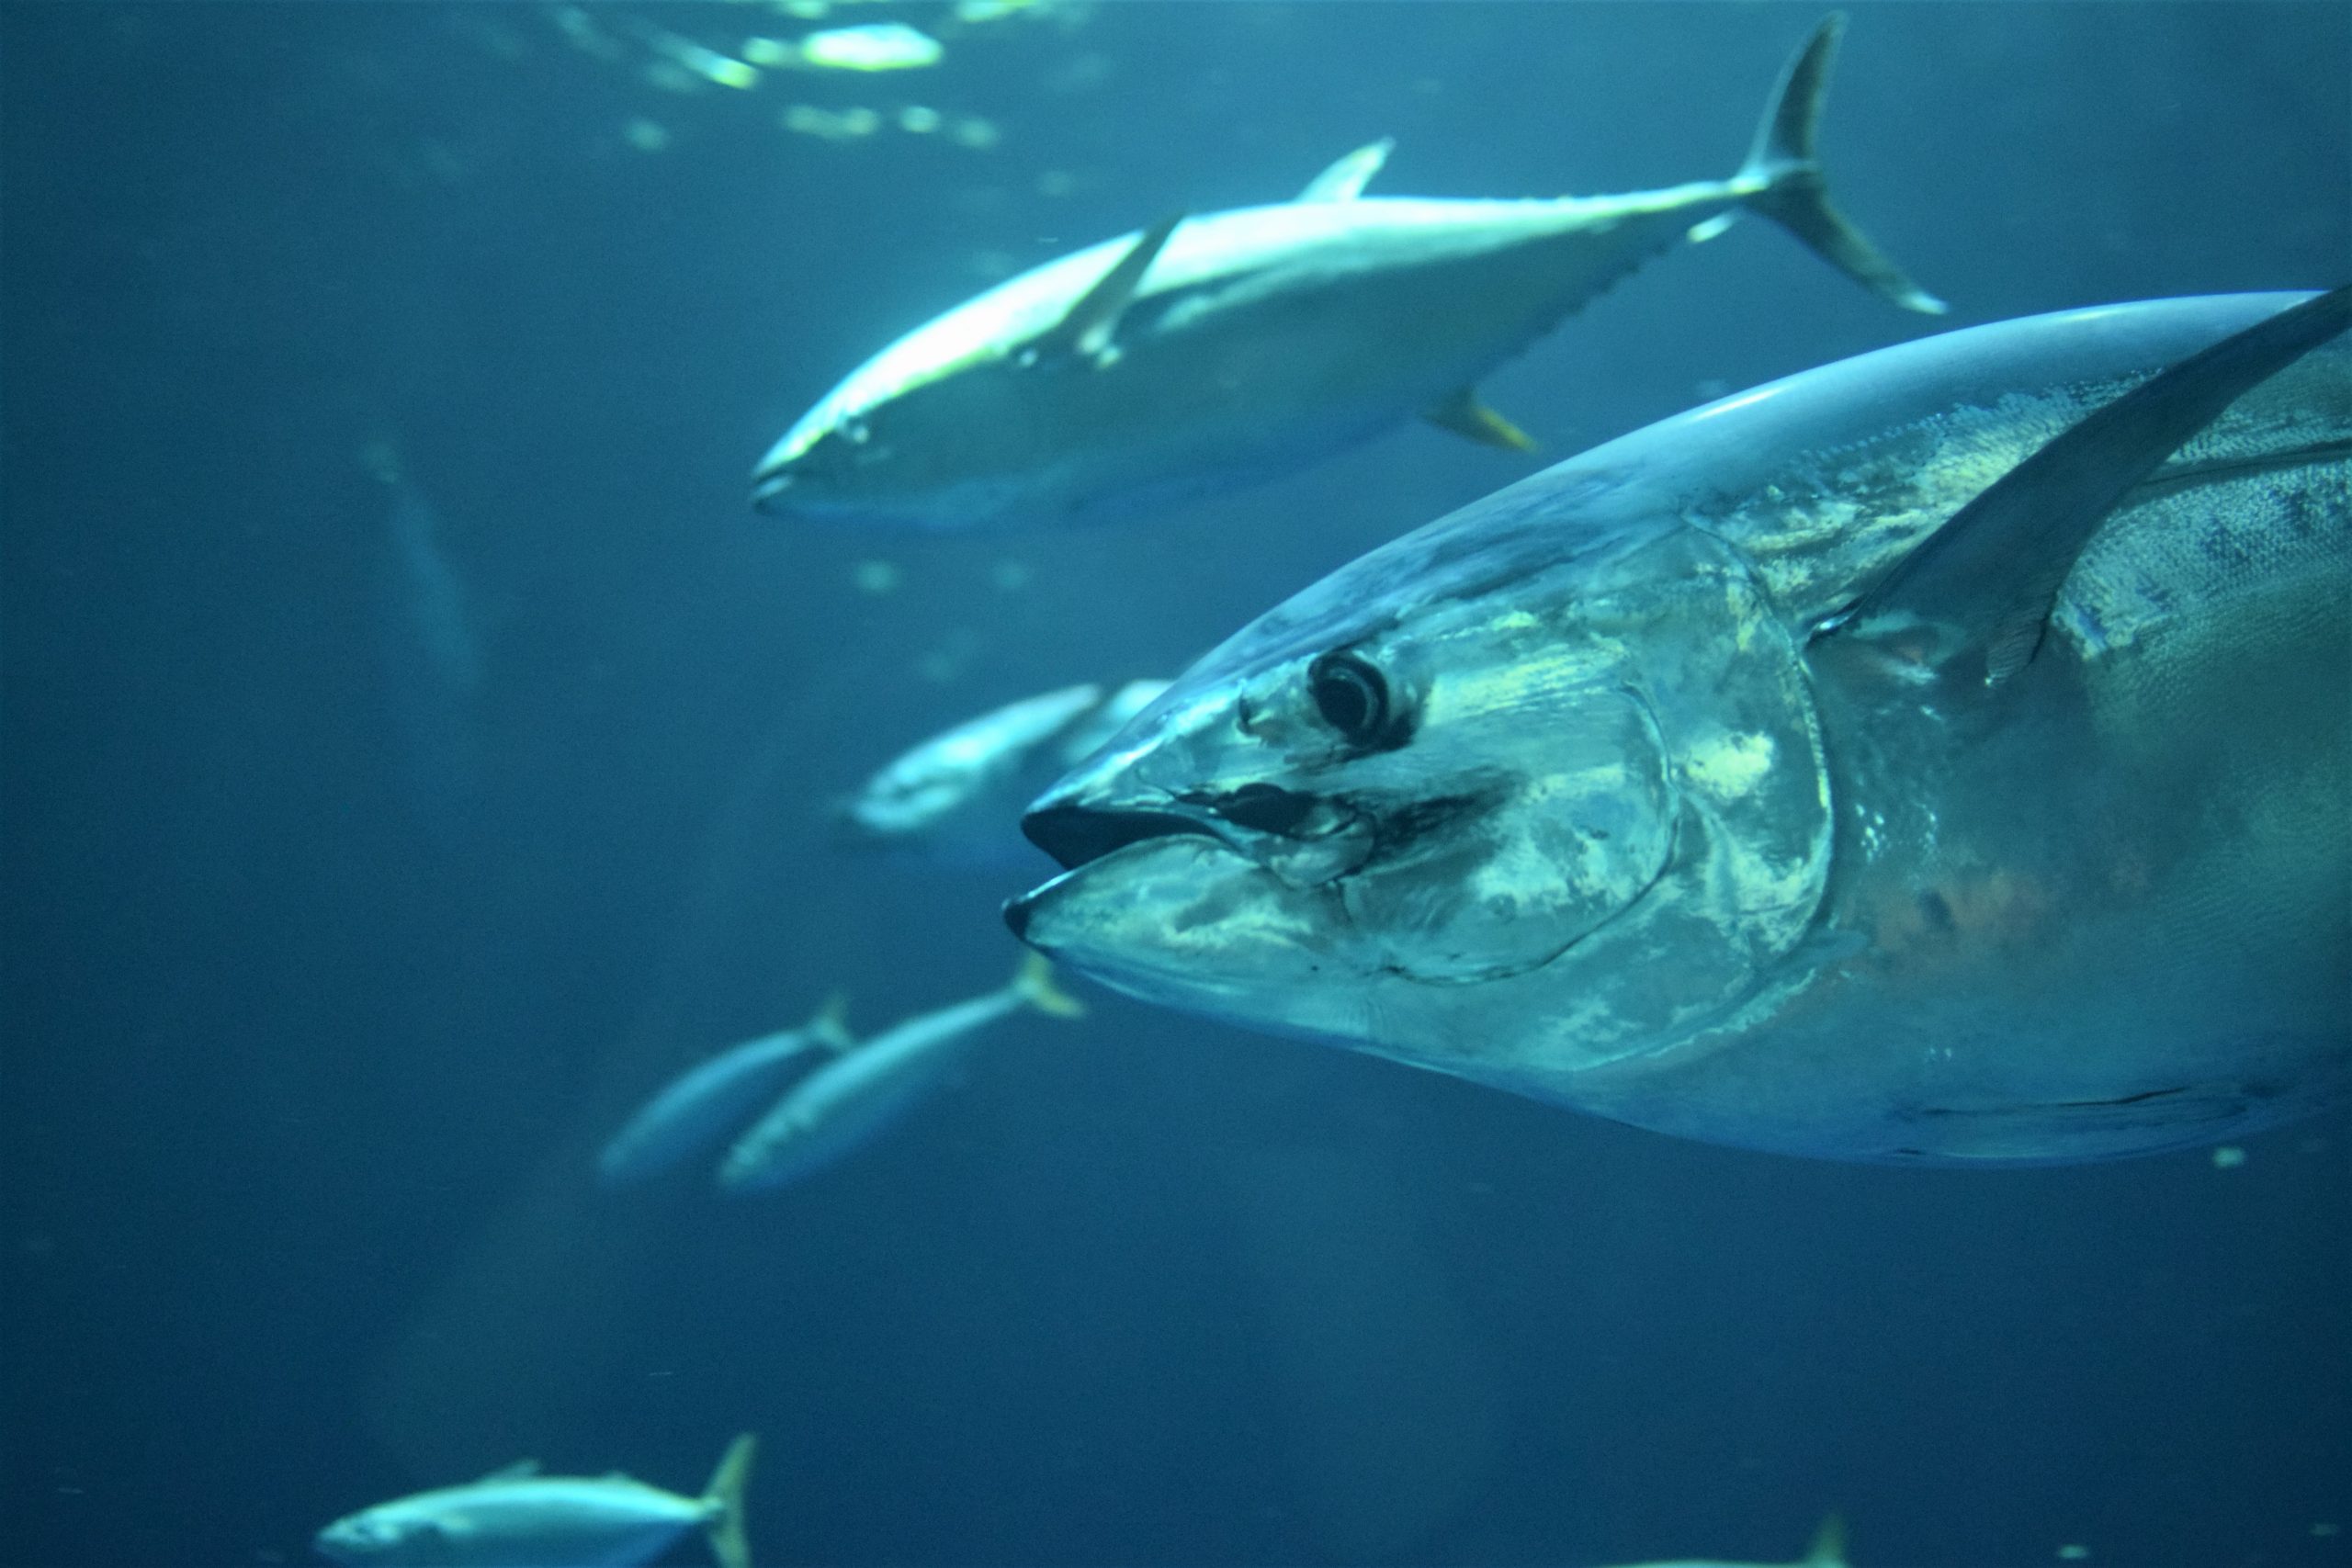 Northern Area Trophy Fishery for Atlantic Bluefin Tuna: Closed